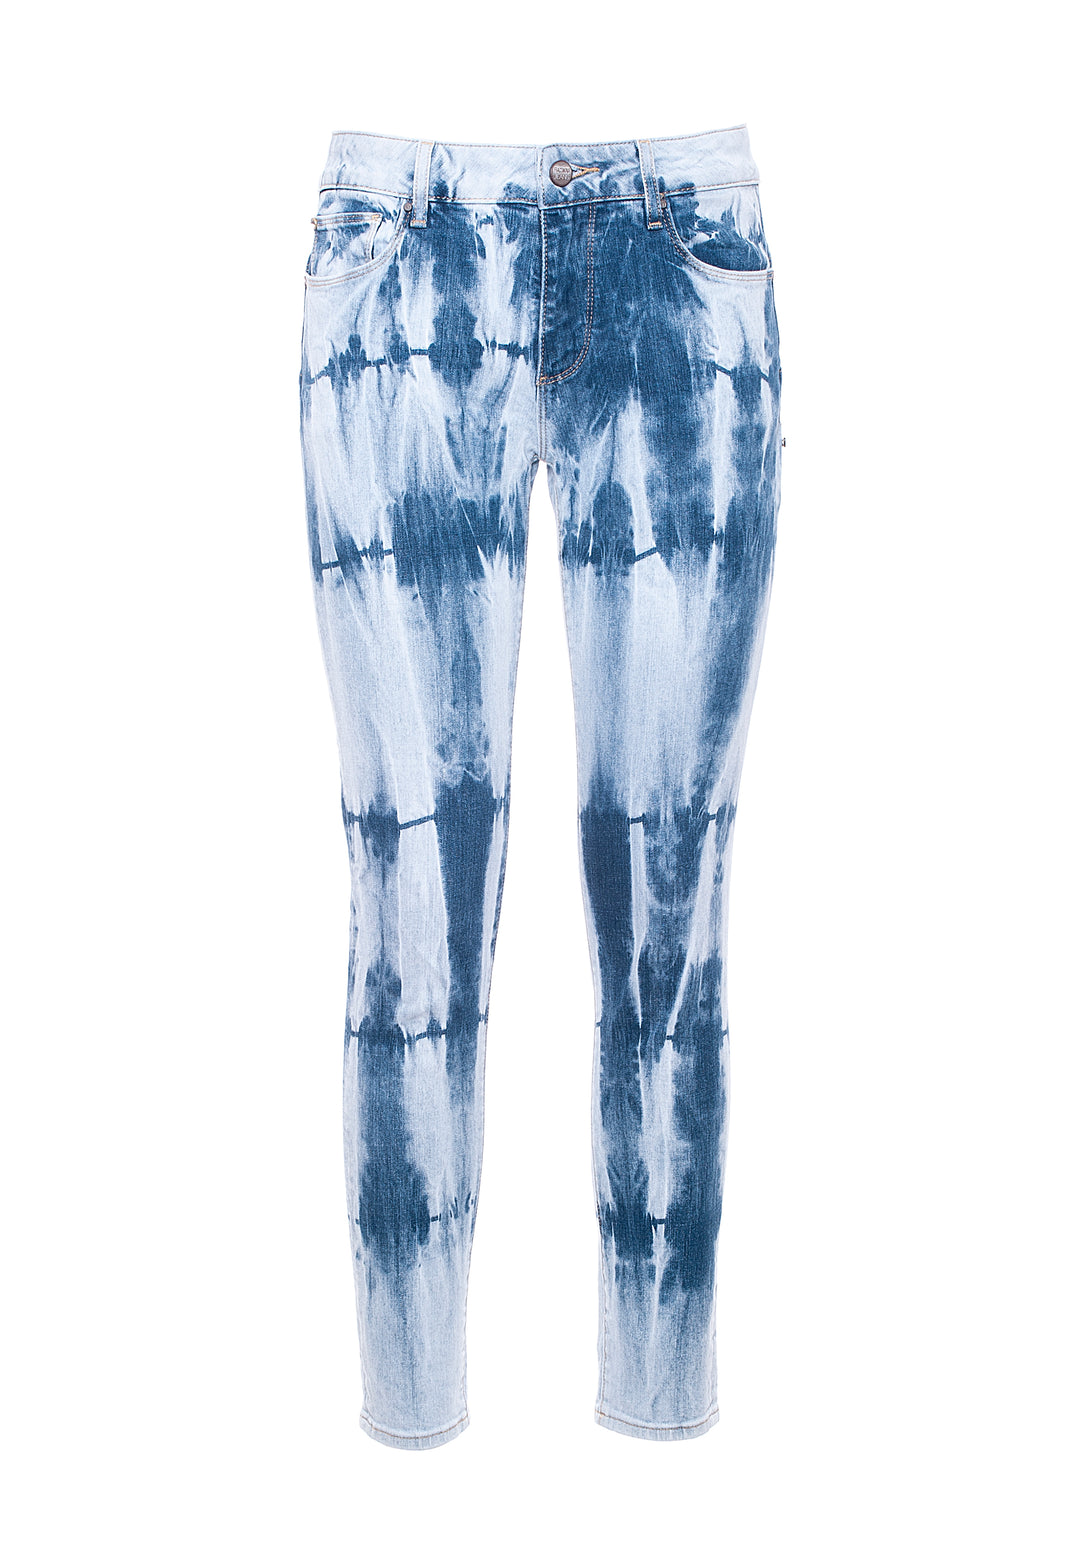 Jeans skinny fit made in stretch denim with tie-dye effect Fracomina FP21SP5011D401O3-621_5